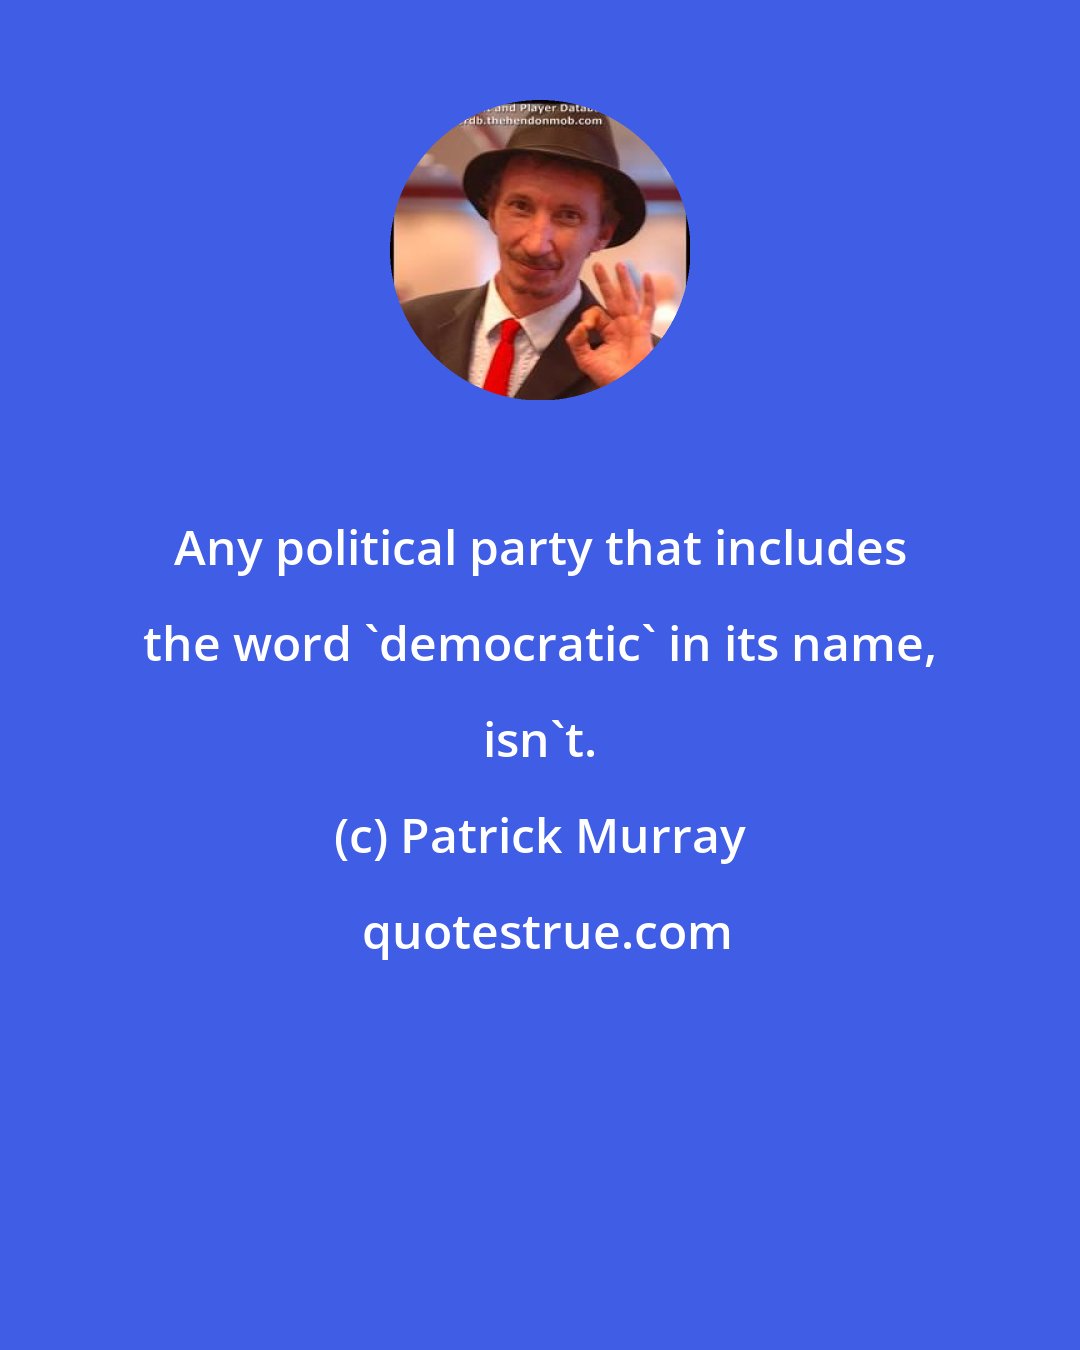 Patrick Murray: Any political party that includes the word 'democratic' in its name, isn't.